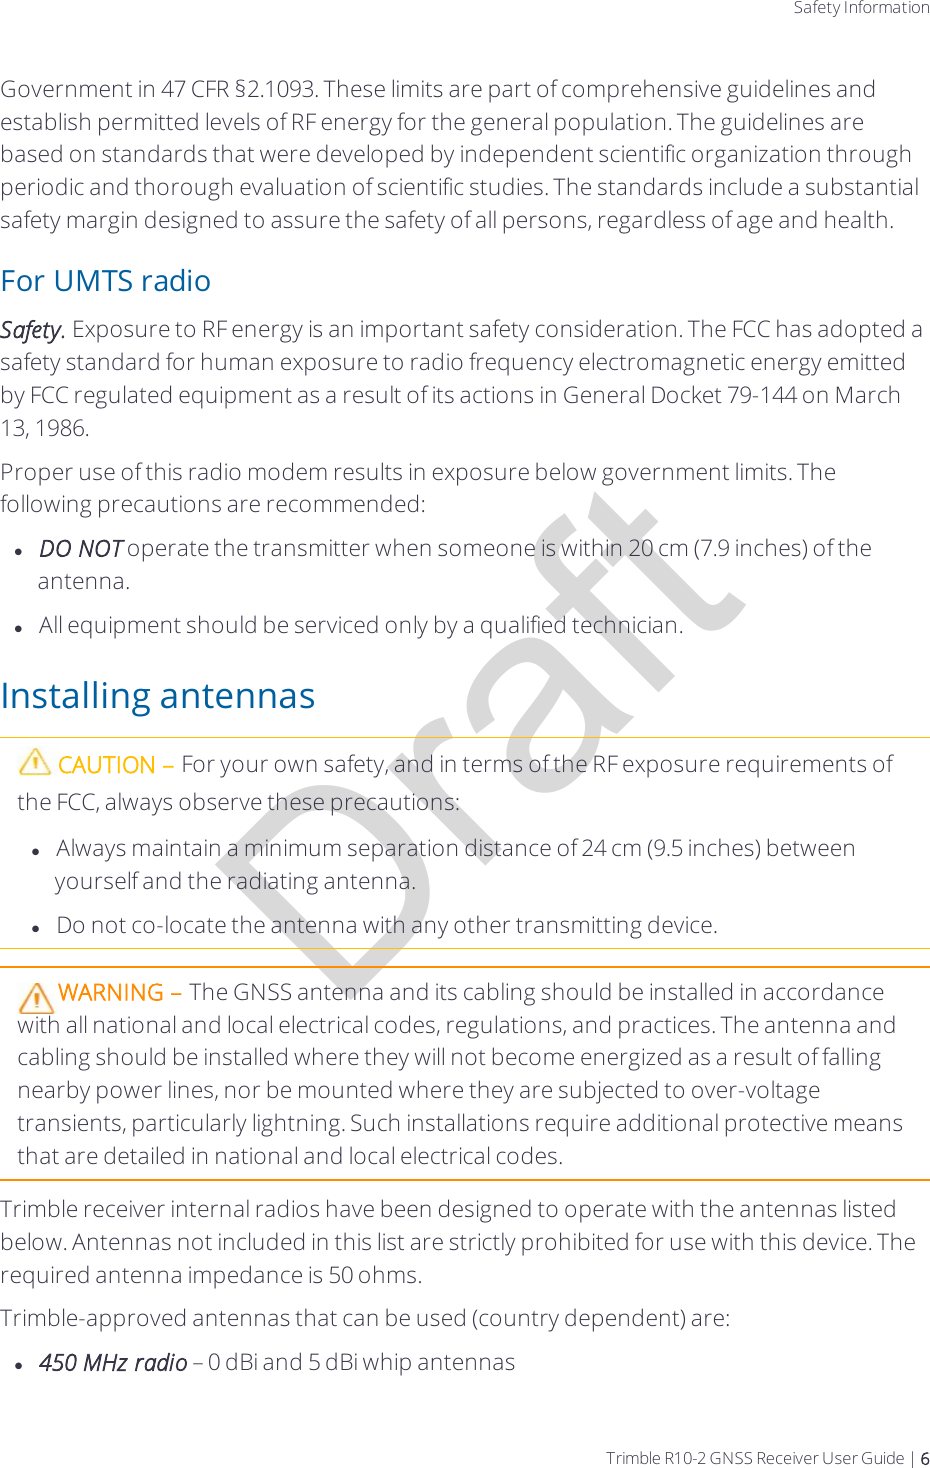 DraftSafety InformationGovernment in 47 CFR §2.1093. These limits are part of comprehensive guidelines and establish permitted levels of RF energy for the general population. The guidelines are based on standards that were developed by independent scientific organization through periodic and thorough evaluation of scientific studies. The standards include a substantial safety margin designed to assure the safety of all persons, regardless of age and health.For UMTS radioSafety. Exposure to RF energy is an important safety consideration. The FCC has adopted a safety standard for human exposure to radio frequency electromagnetic energy emitted by FCC regulated equipment as a result of its actions in General Docket 79-144 on March 13, 1986.Proper use of this radio modem results in exposure below government limits. The following precautions are recommended:lDO NOT operate the transmitter when someone is within 20 cm (7.9 inches) of the antenna.lAll equipment should be serviced only by a qualified technician.Installing antennasCAUTION – For your own safety, and in terms of the RF exposure requirements of the FCC, always observe these precautions:lAlways maintain a minimum separation distance of 24 cm (9.5 inches) between yourself and the radiating antenna.lDo not co-locate the antenna with any other transmitting device.WARNING – The GNSS antenna and its cabling should be installed in accordance with all national and local electrical codes, regulations, and practices. The antenna and cabling should be installed where they will not become energized as a result of falling nearby power lines, nor be mounted where they are subjected to over-voltage transients, particularly lightning. Such installations require additional protective means that are detailed in national and local electrical codes.Trimble receiver internal radios have been designed to operate with the antennas listed below. Antennas not included in this list are strictly prohibited for use with this device. The required antenna impedance is 50 ohms.Trimble-approved antennas that can be used (country dependent) are:l450 MHz radio – 0dBi and 5 dBi whip antennasTrimble R10-2 GNSS Receiver User Guide | 6